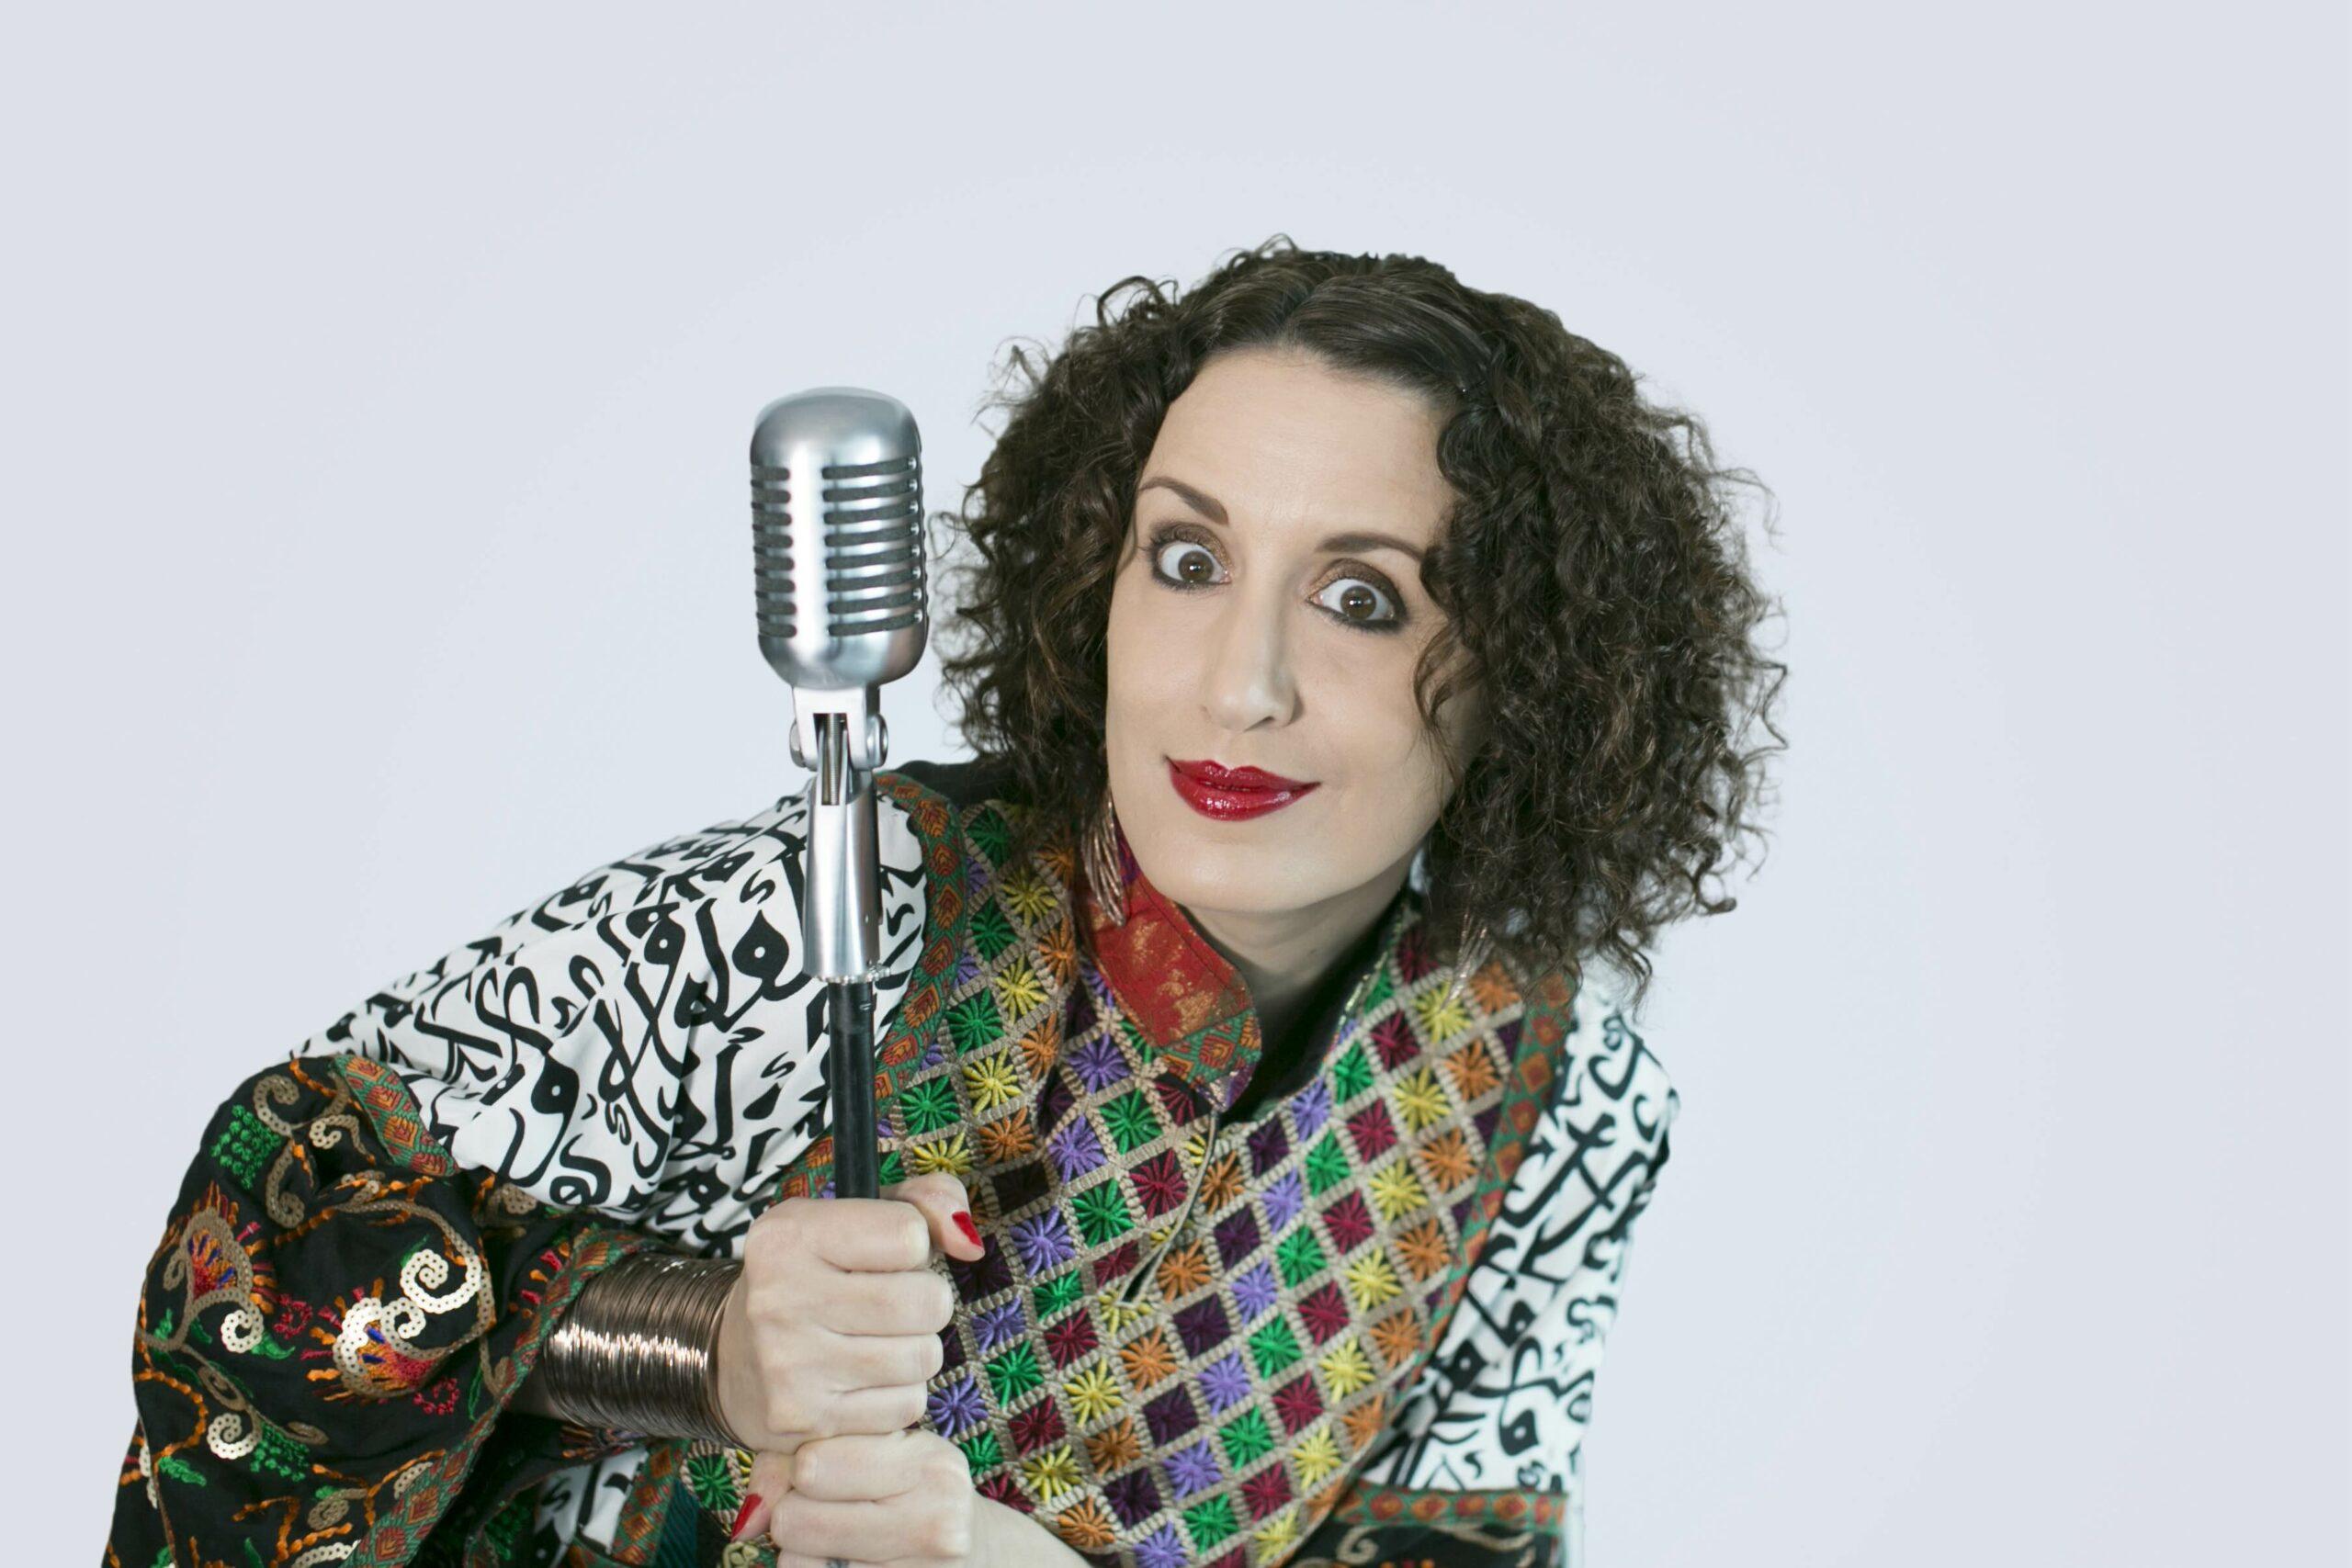 Mina Liccione on IWD: The comedian tells us what makes the Middle East laugh 